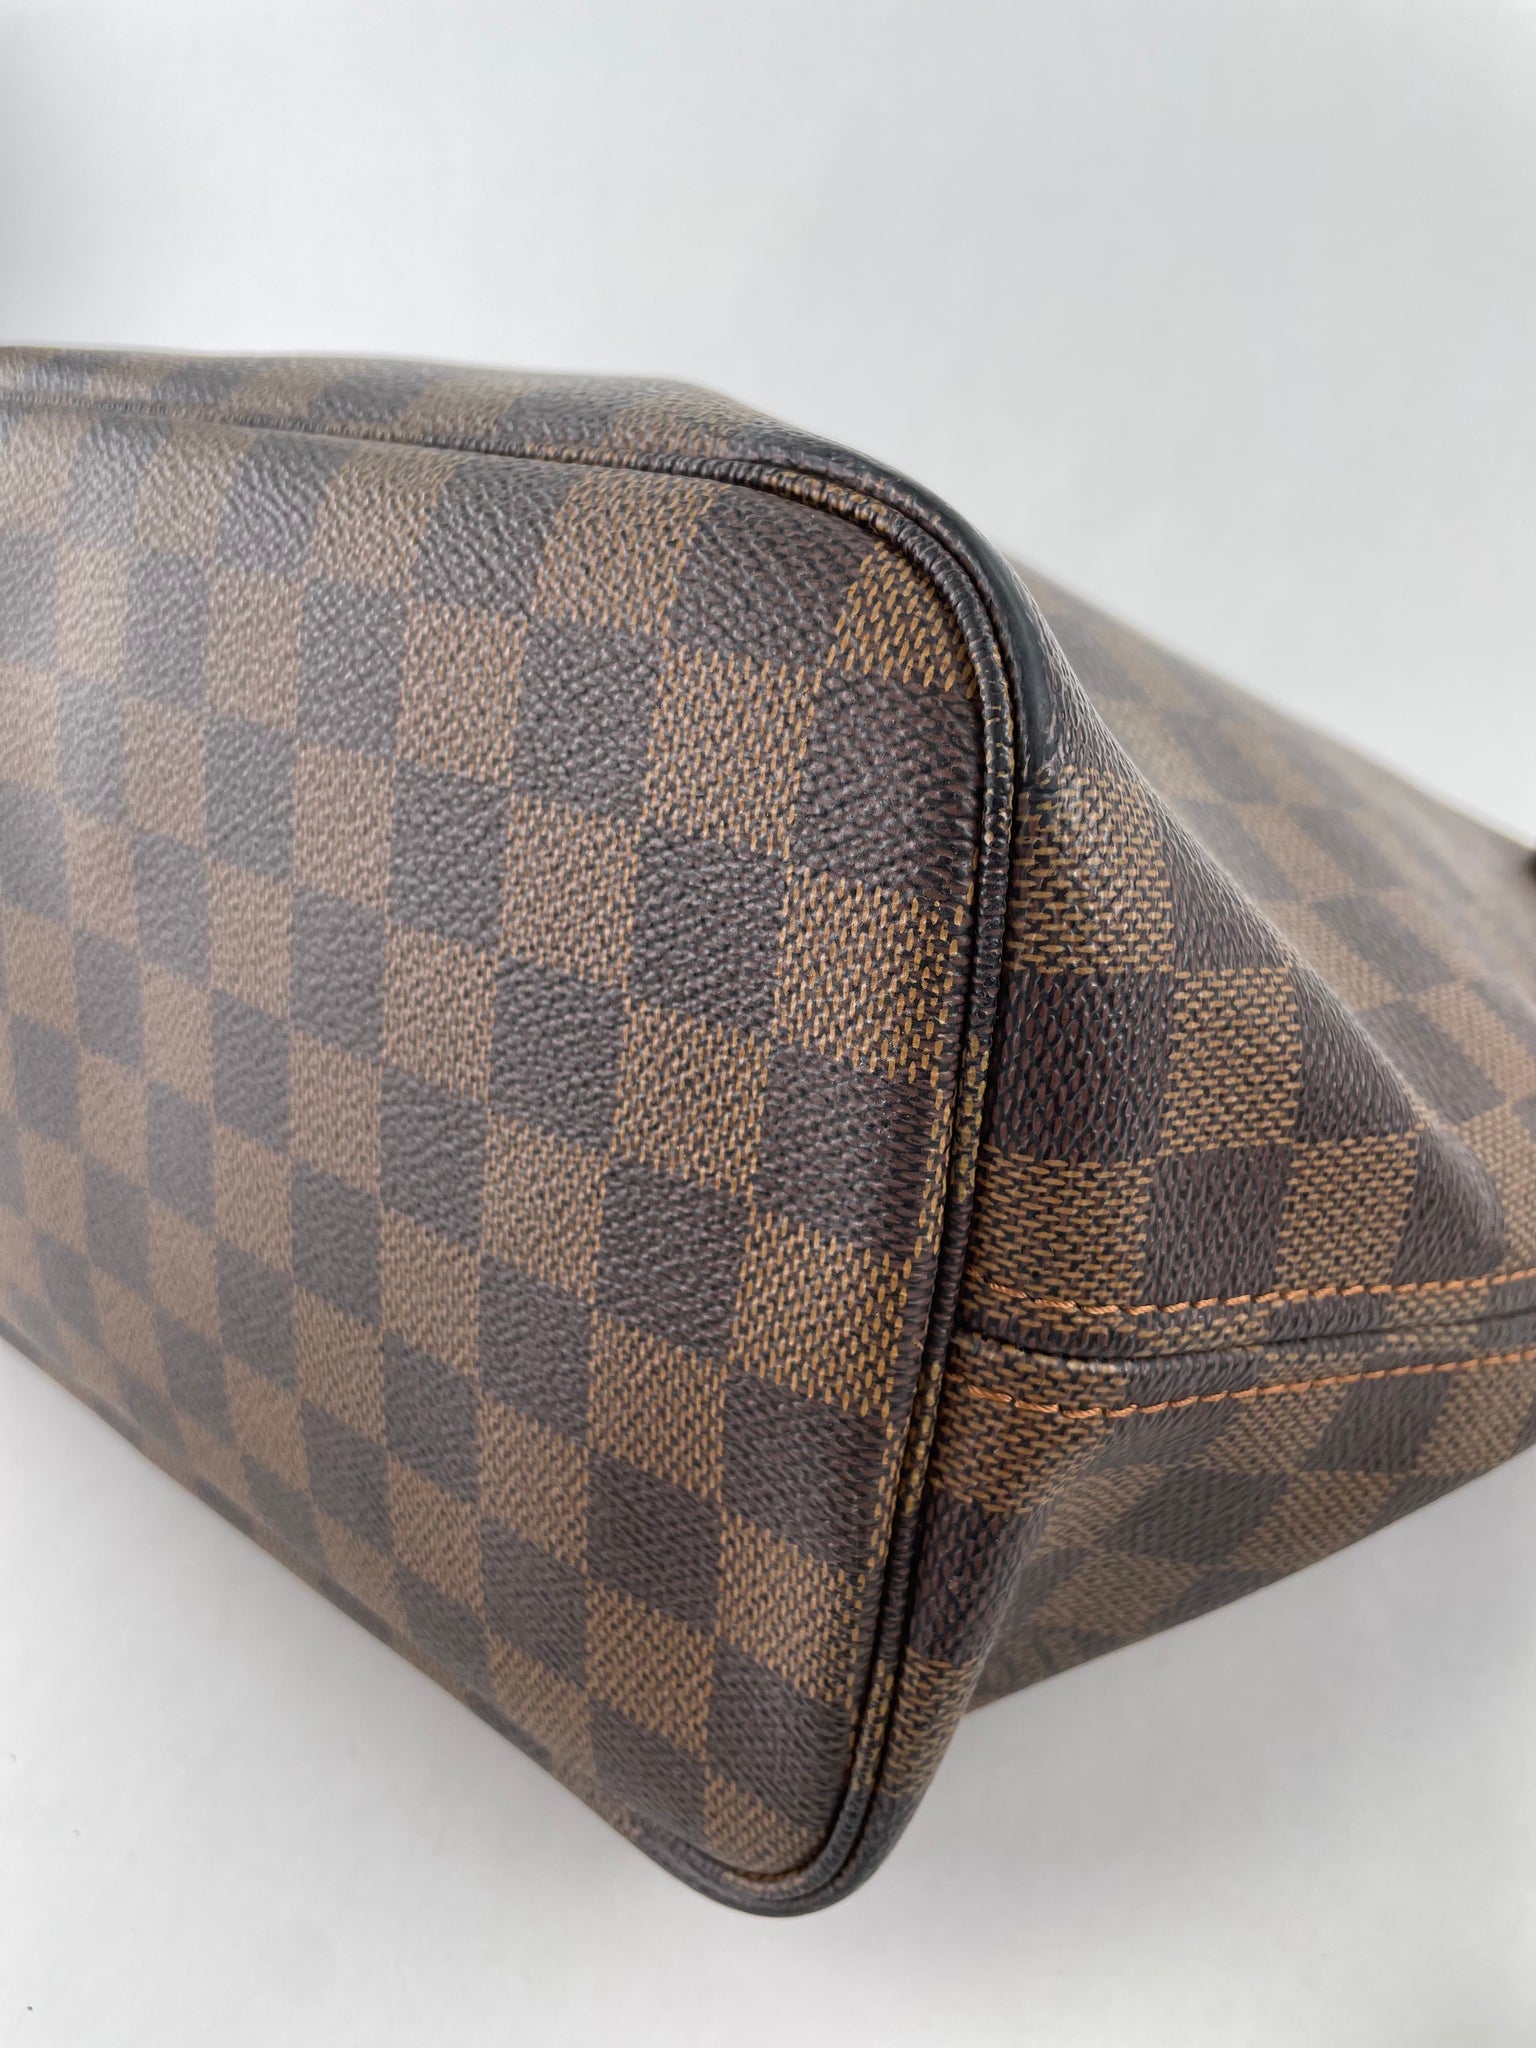 I was never a Neverfull or a Damier Ebene gal until i really saw this combo  (i love the traditional Monogram canvas ) . But something about the pink &  brown is